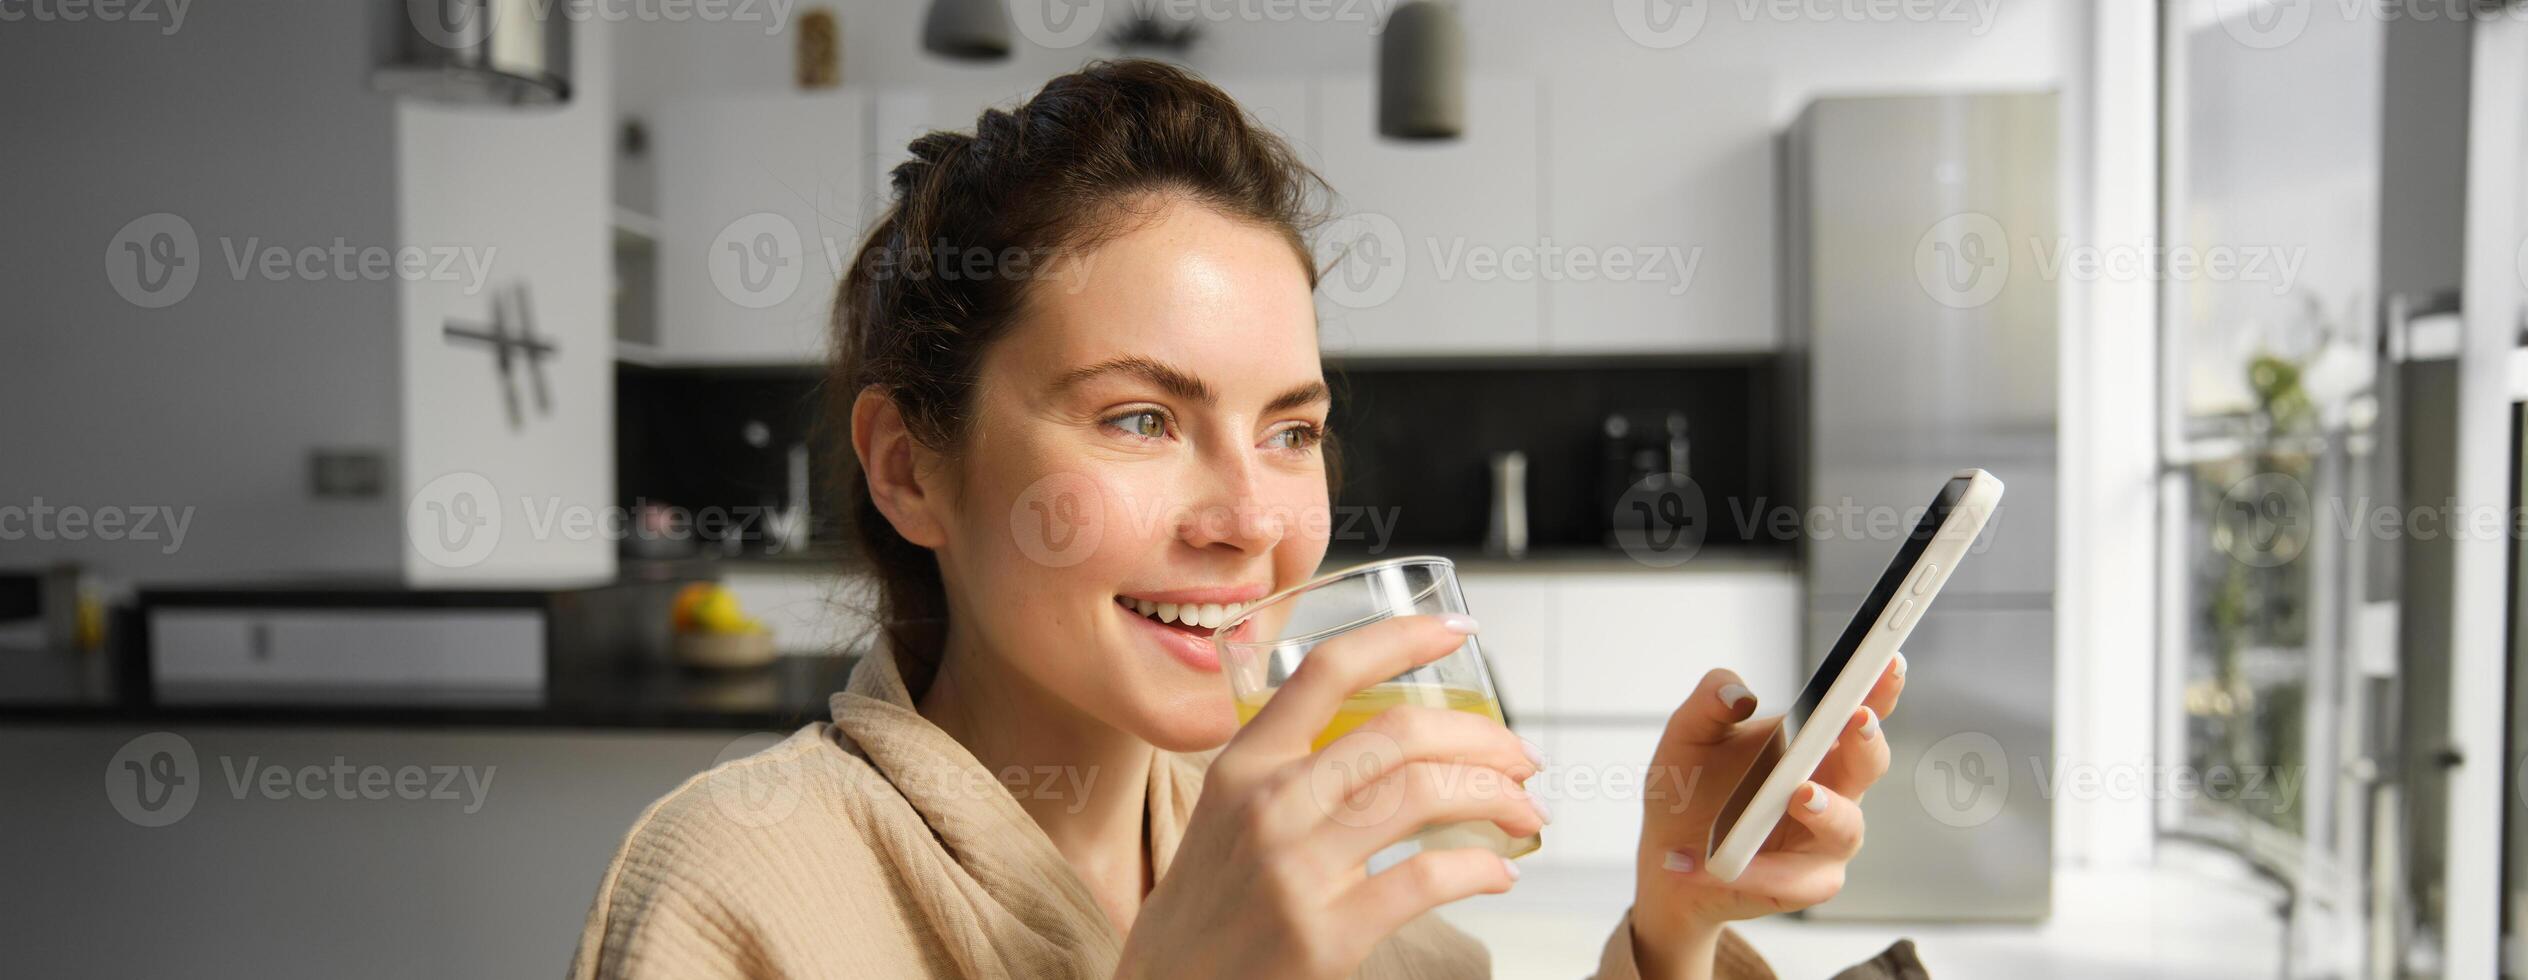 Close up portrait of laughing, smiling young woman enjoys morning, drinking orange juice and holding smartphone, reading news on mobile app photo